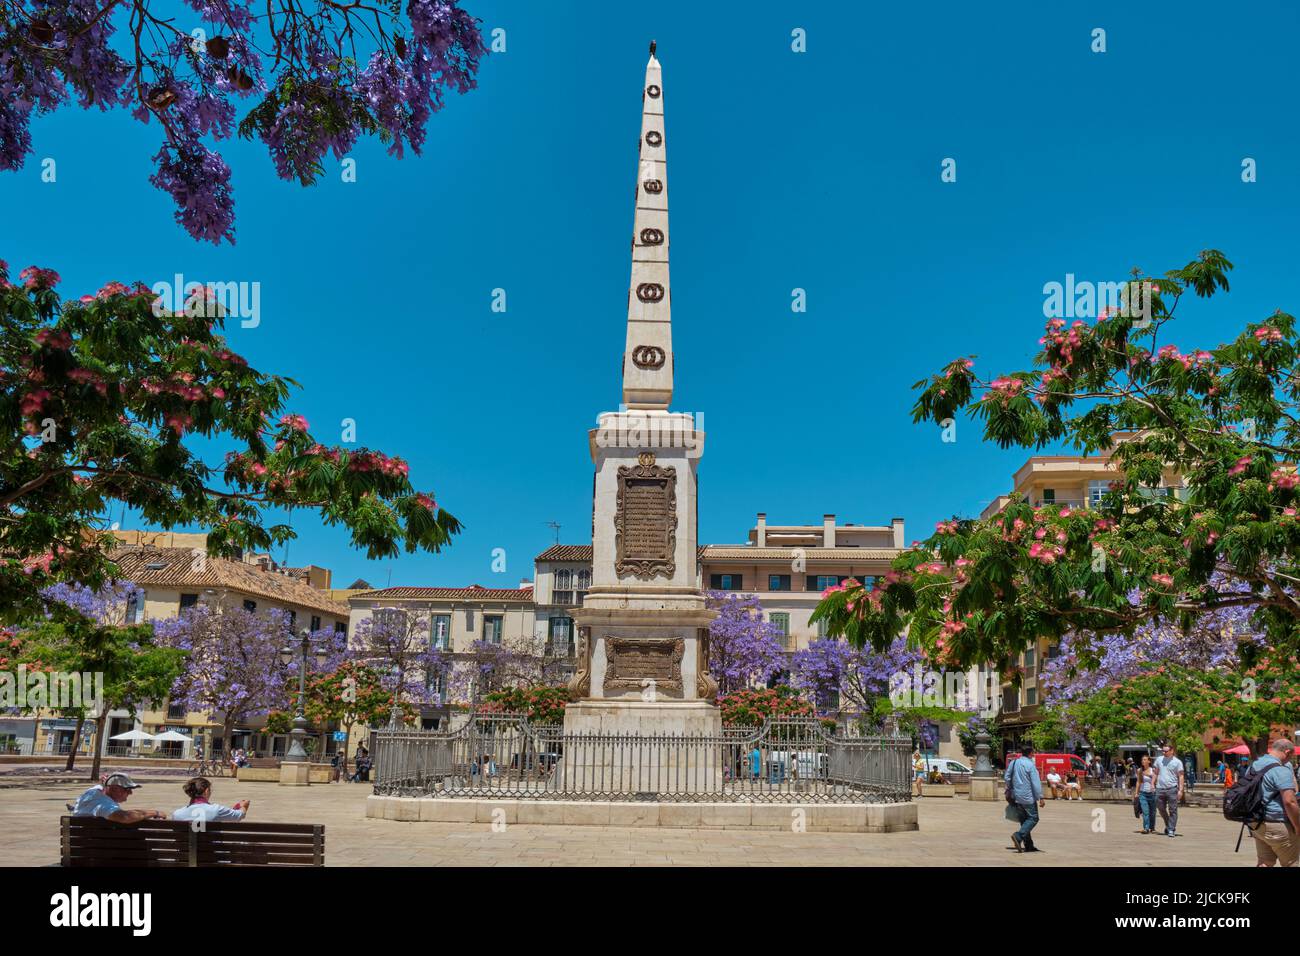 Malaga, Spain - May 26, 2022: A view over the Plaza de la Merced square in Malaga, Spain, one of the main squares in the center of the city, presided Stock Photo